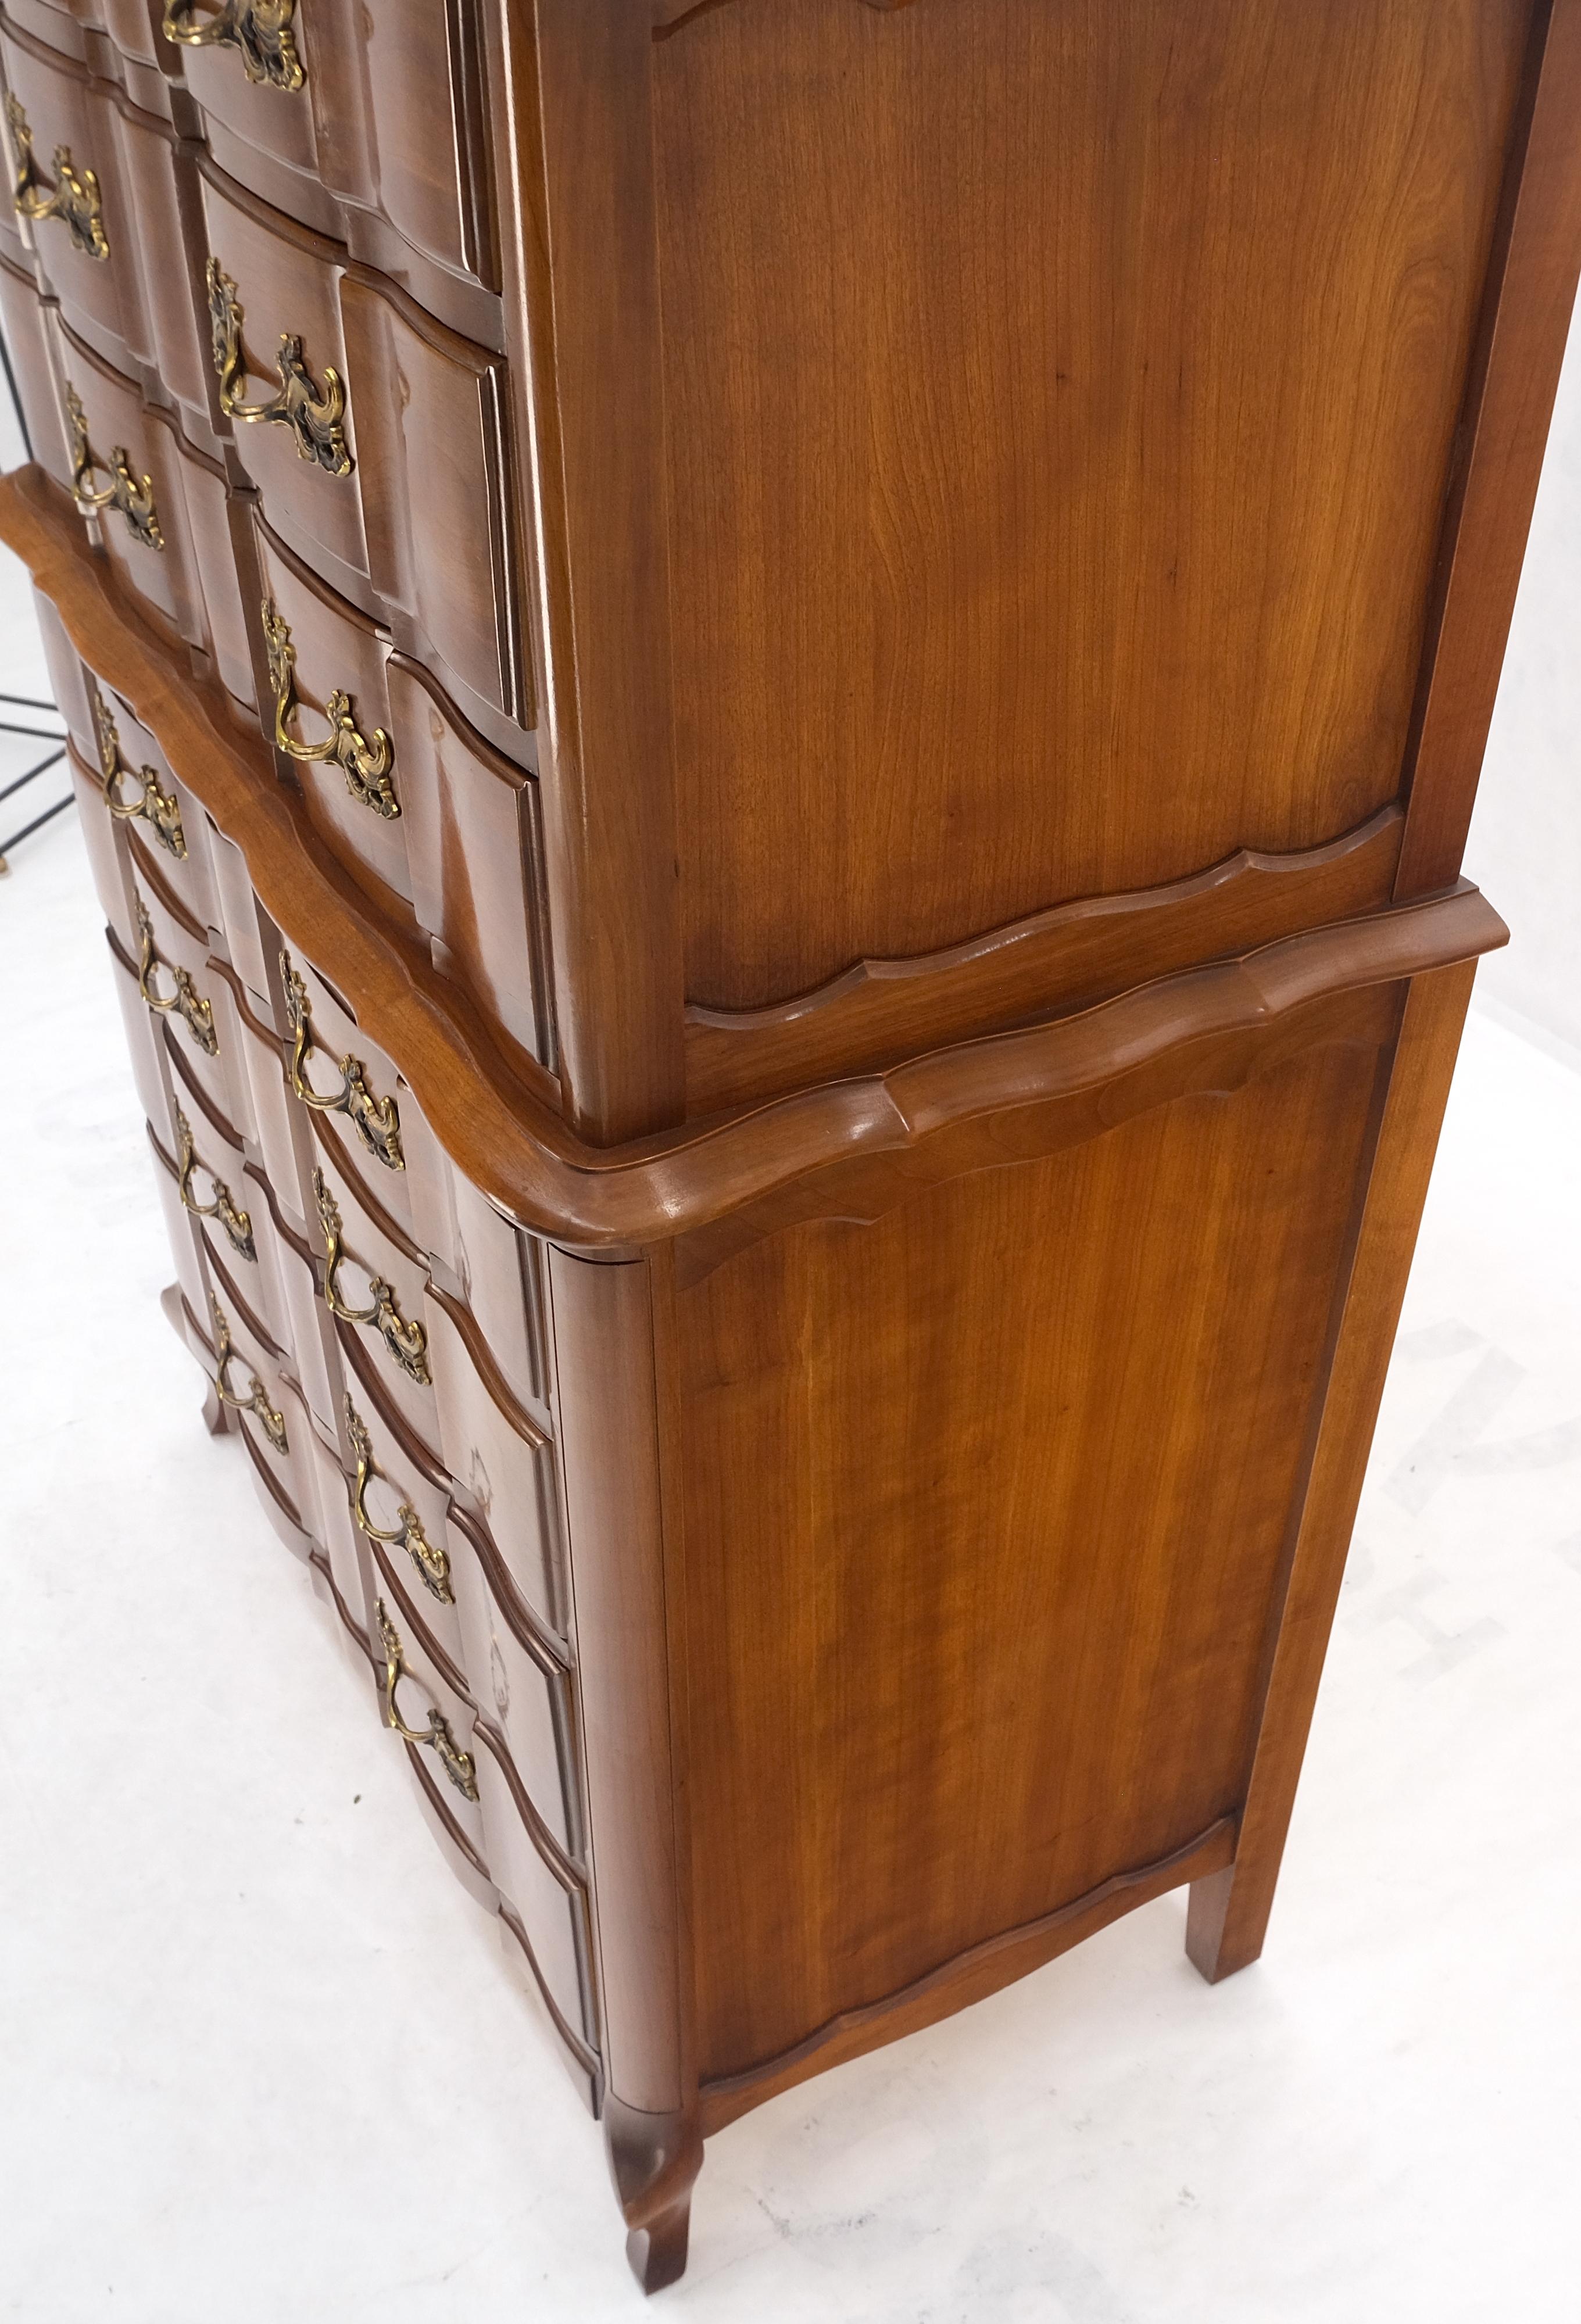 Lacquered Solid Cherry Country French Brass Pulls 7 Drawers High Chest Dresser MINT!  For Sale